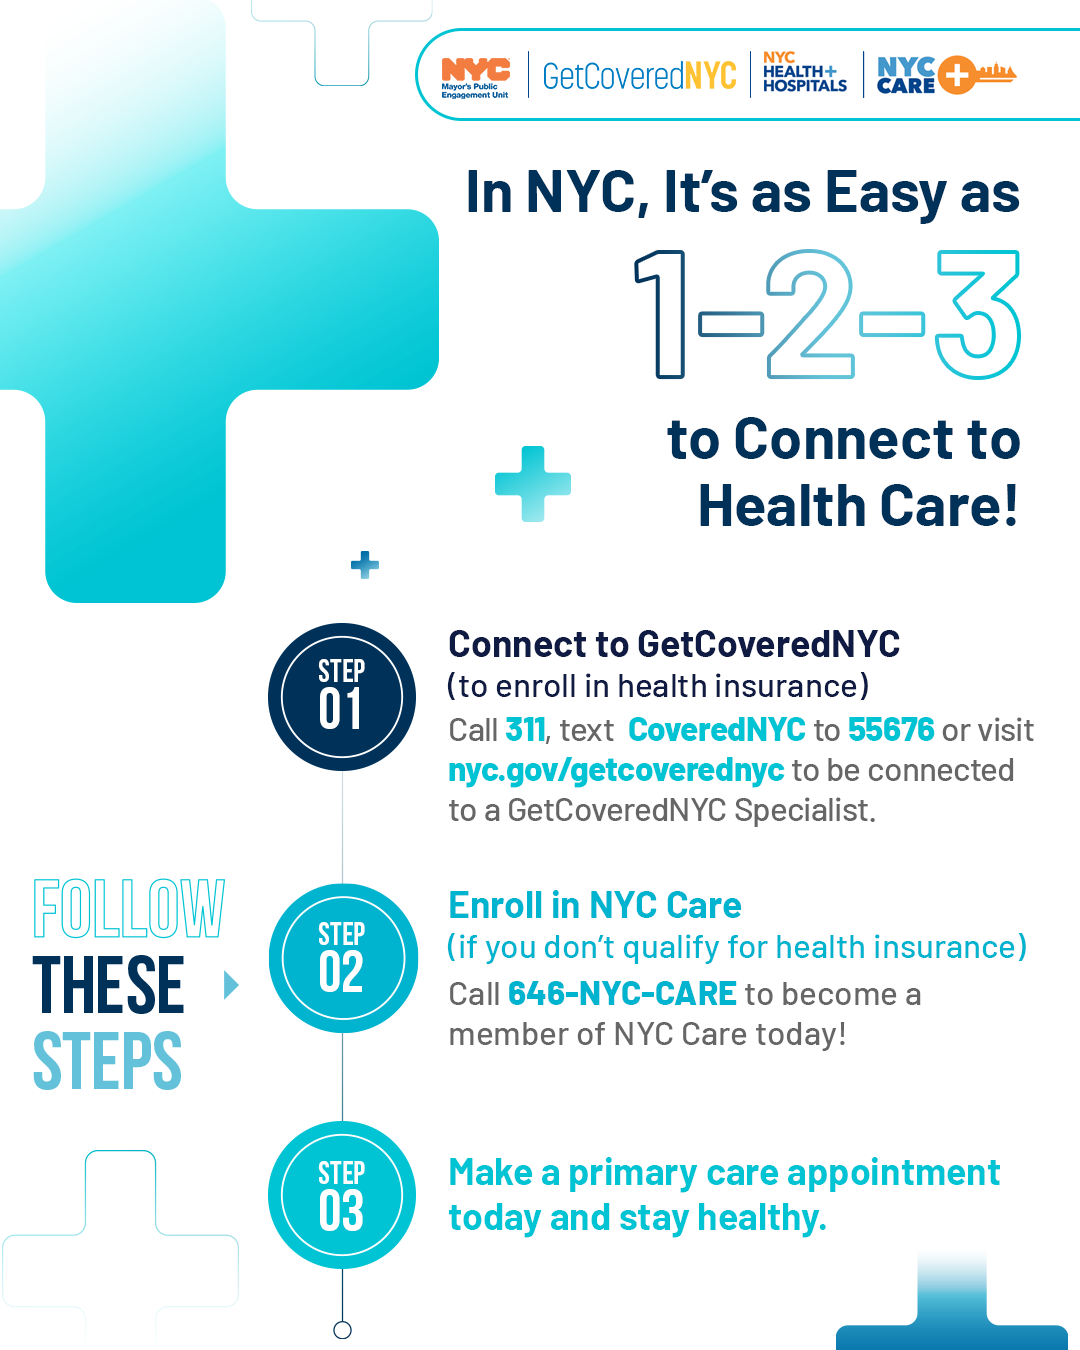 In NYC, It's as Easy as 1-2-3 to Connect to Health Care. Step 1: Connect to GetCoveredNYC. Step 2: Enroll in NYC Care. Step 3: Make a primary care appointment today and stay healthy.